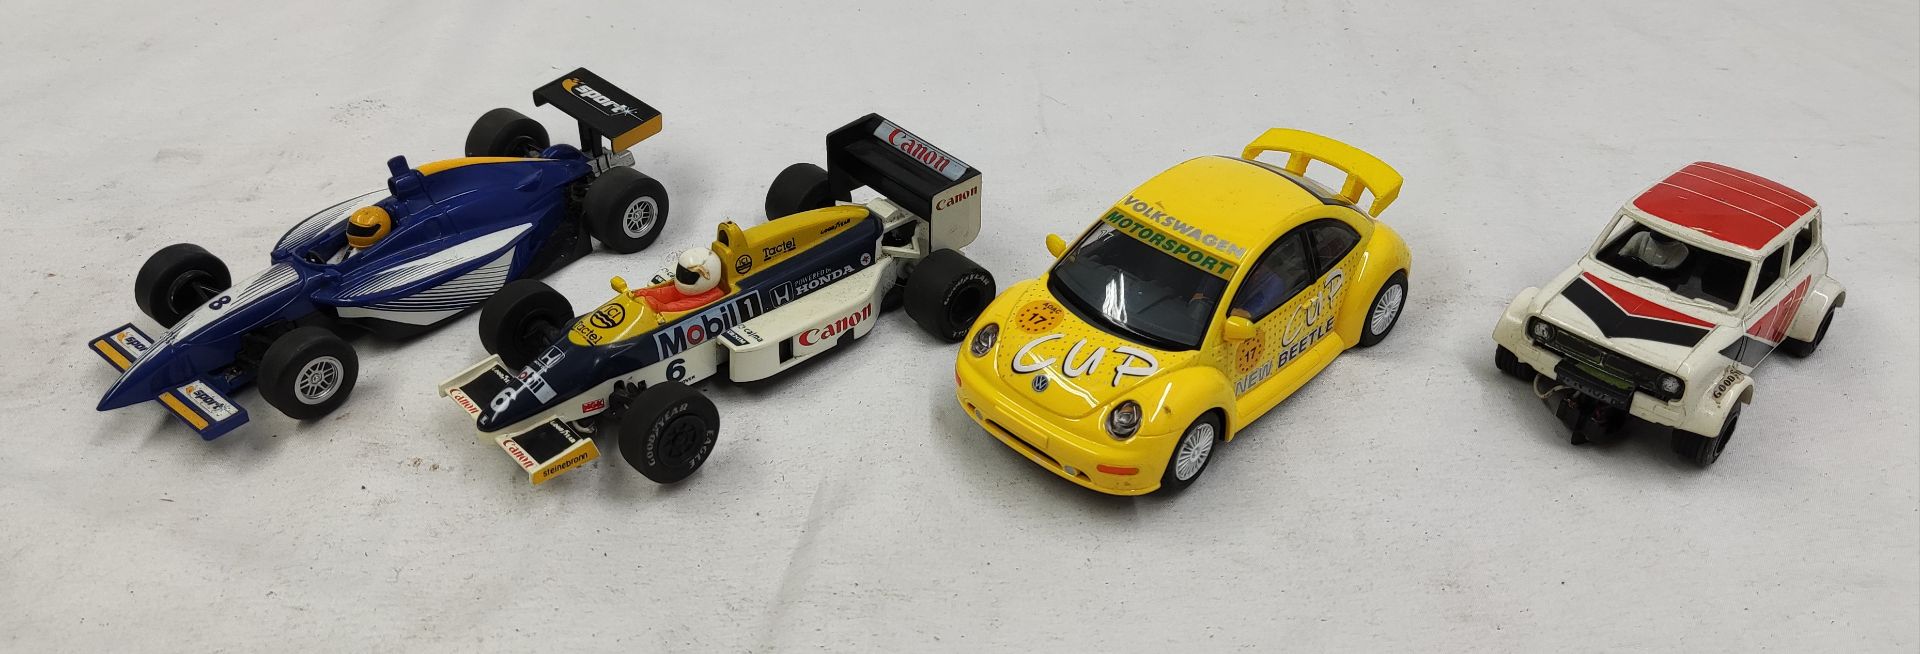 4 x Scalextric Cars Including VW Beetle, F1 Car, Open Wheeler and Mini Clubman 1275GT - Tested and - Image 5 of 11